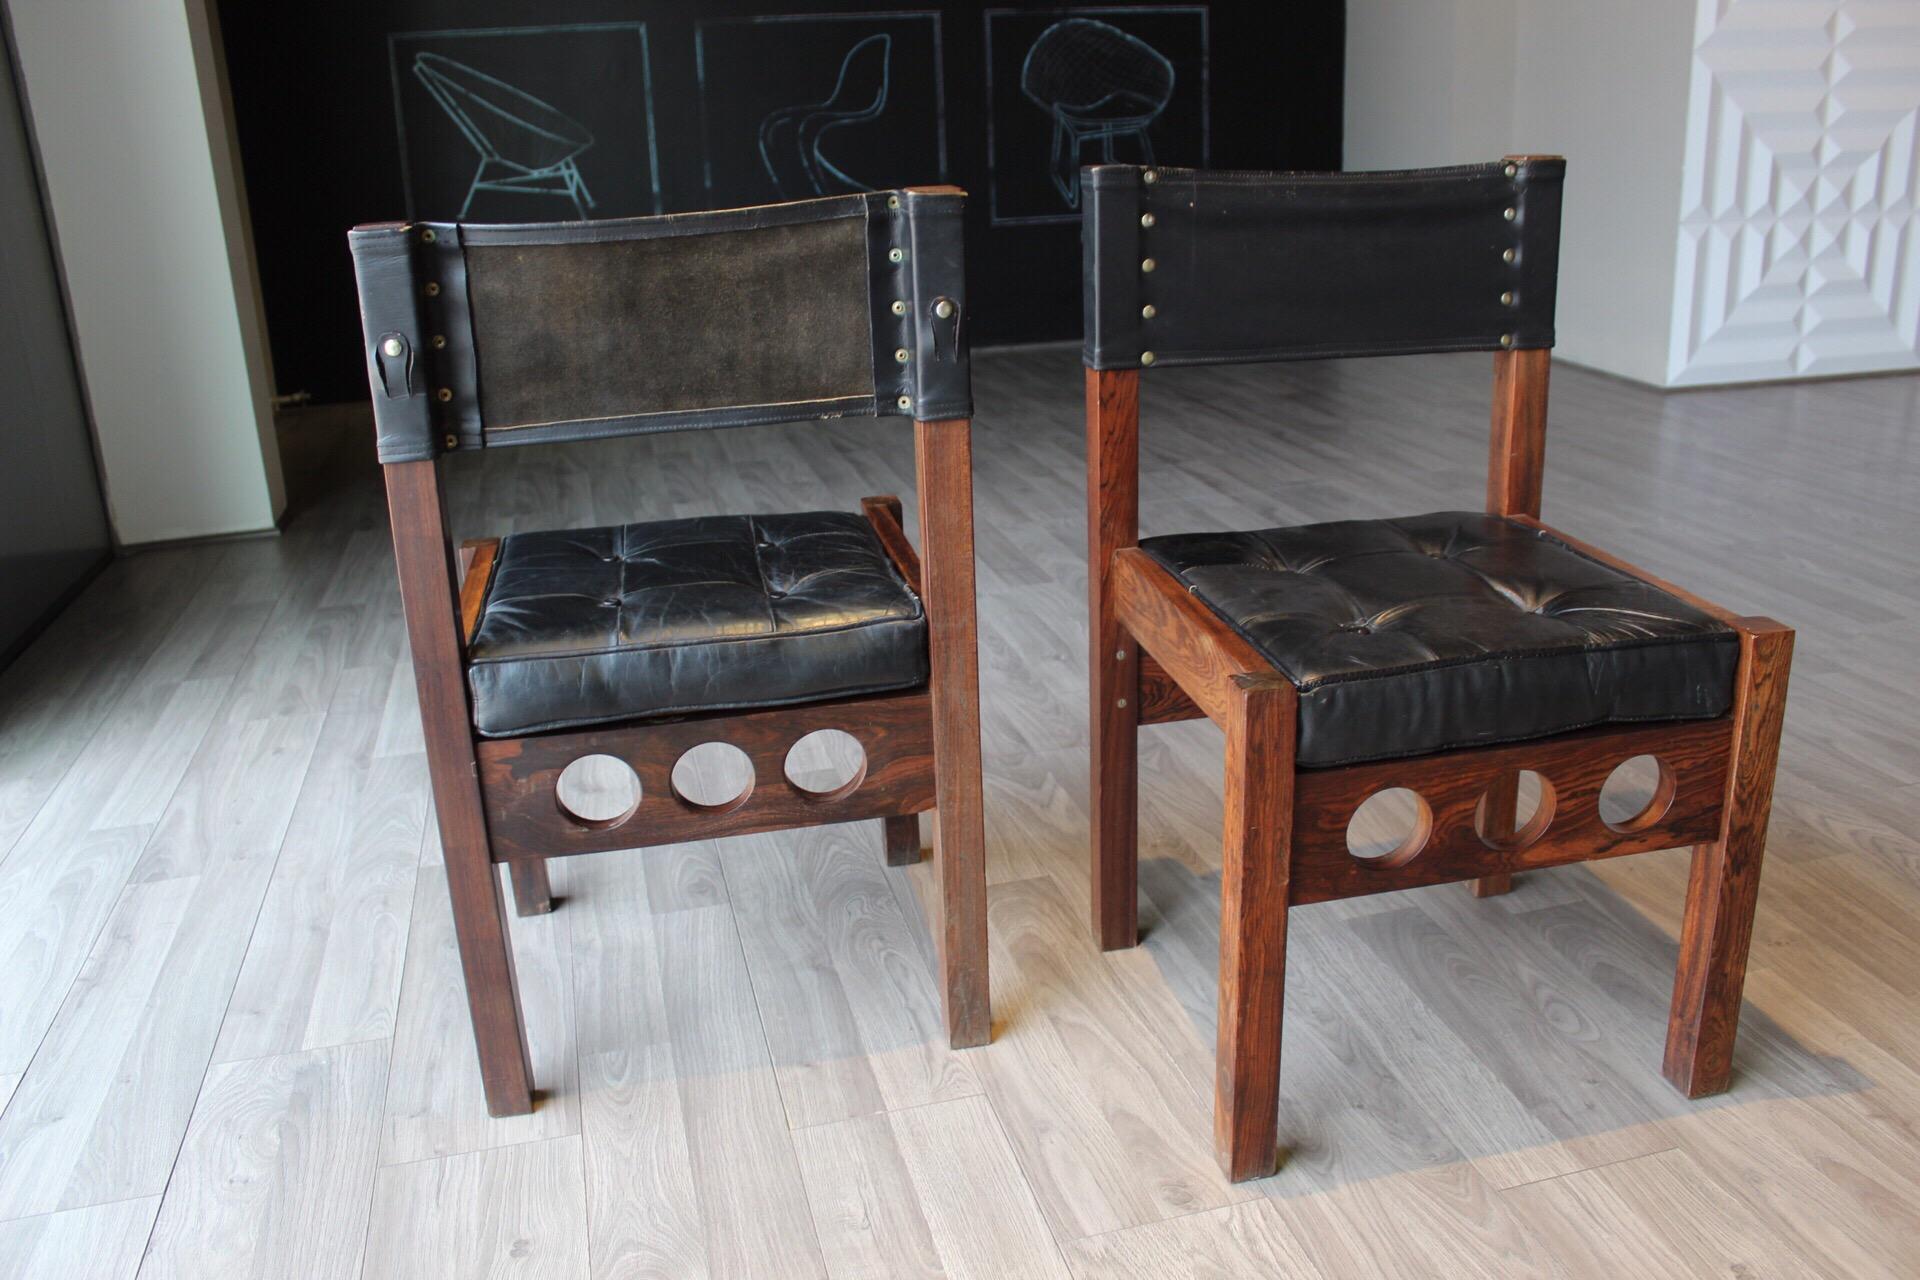 Pair of Don Shoemaker dining chairs, original leather on the seat and back, reversible seat and original buttons too.
Born in Nebraska, Don S. Shoemaker studied painting at The Fine Arts Institution of Chicago. In the late 1940s, he moved to Mexico